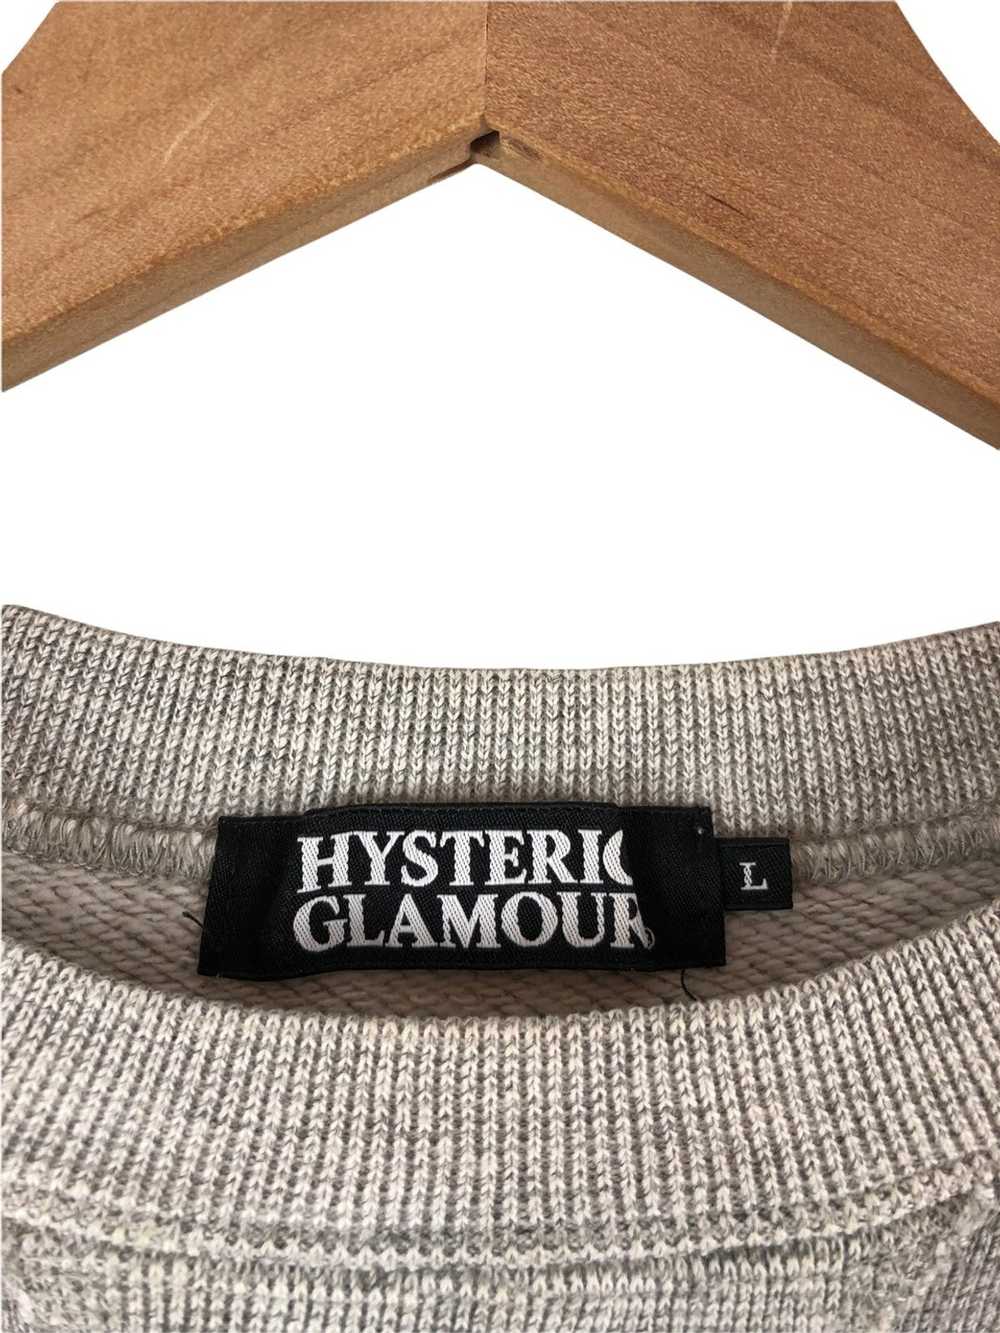 Hysteric Glamour Hysteric Glamour Print Sweatshirt - image 6